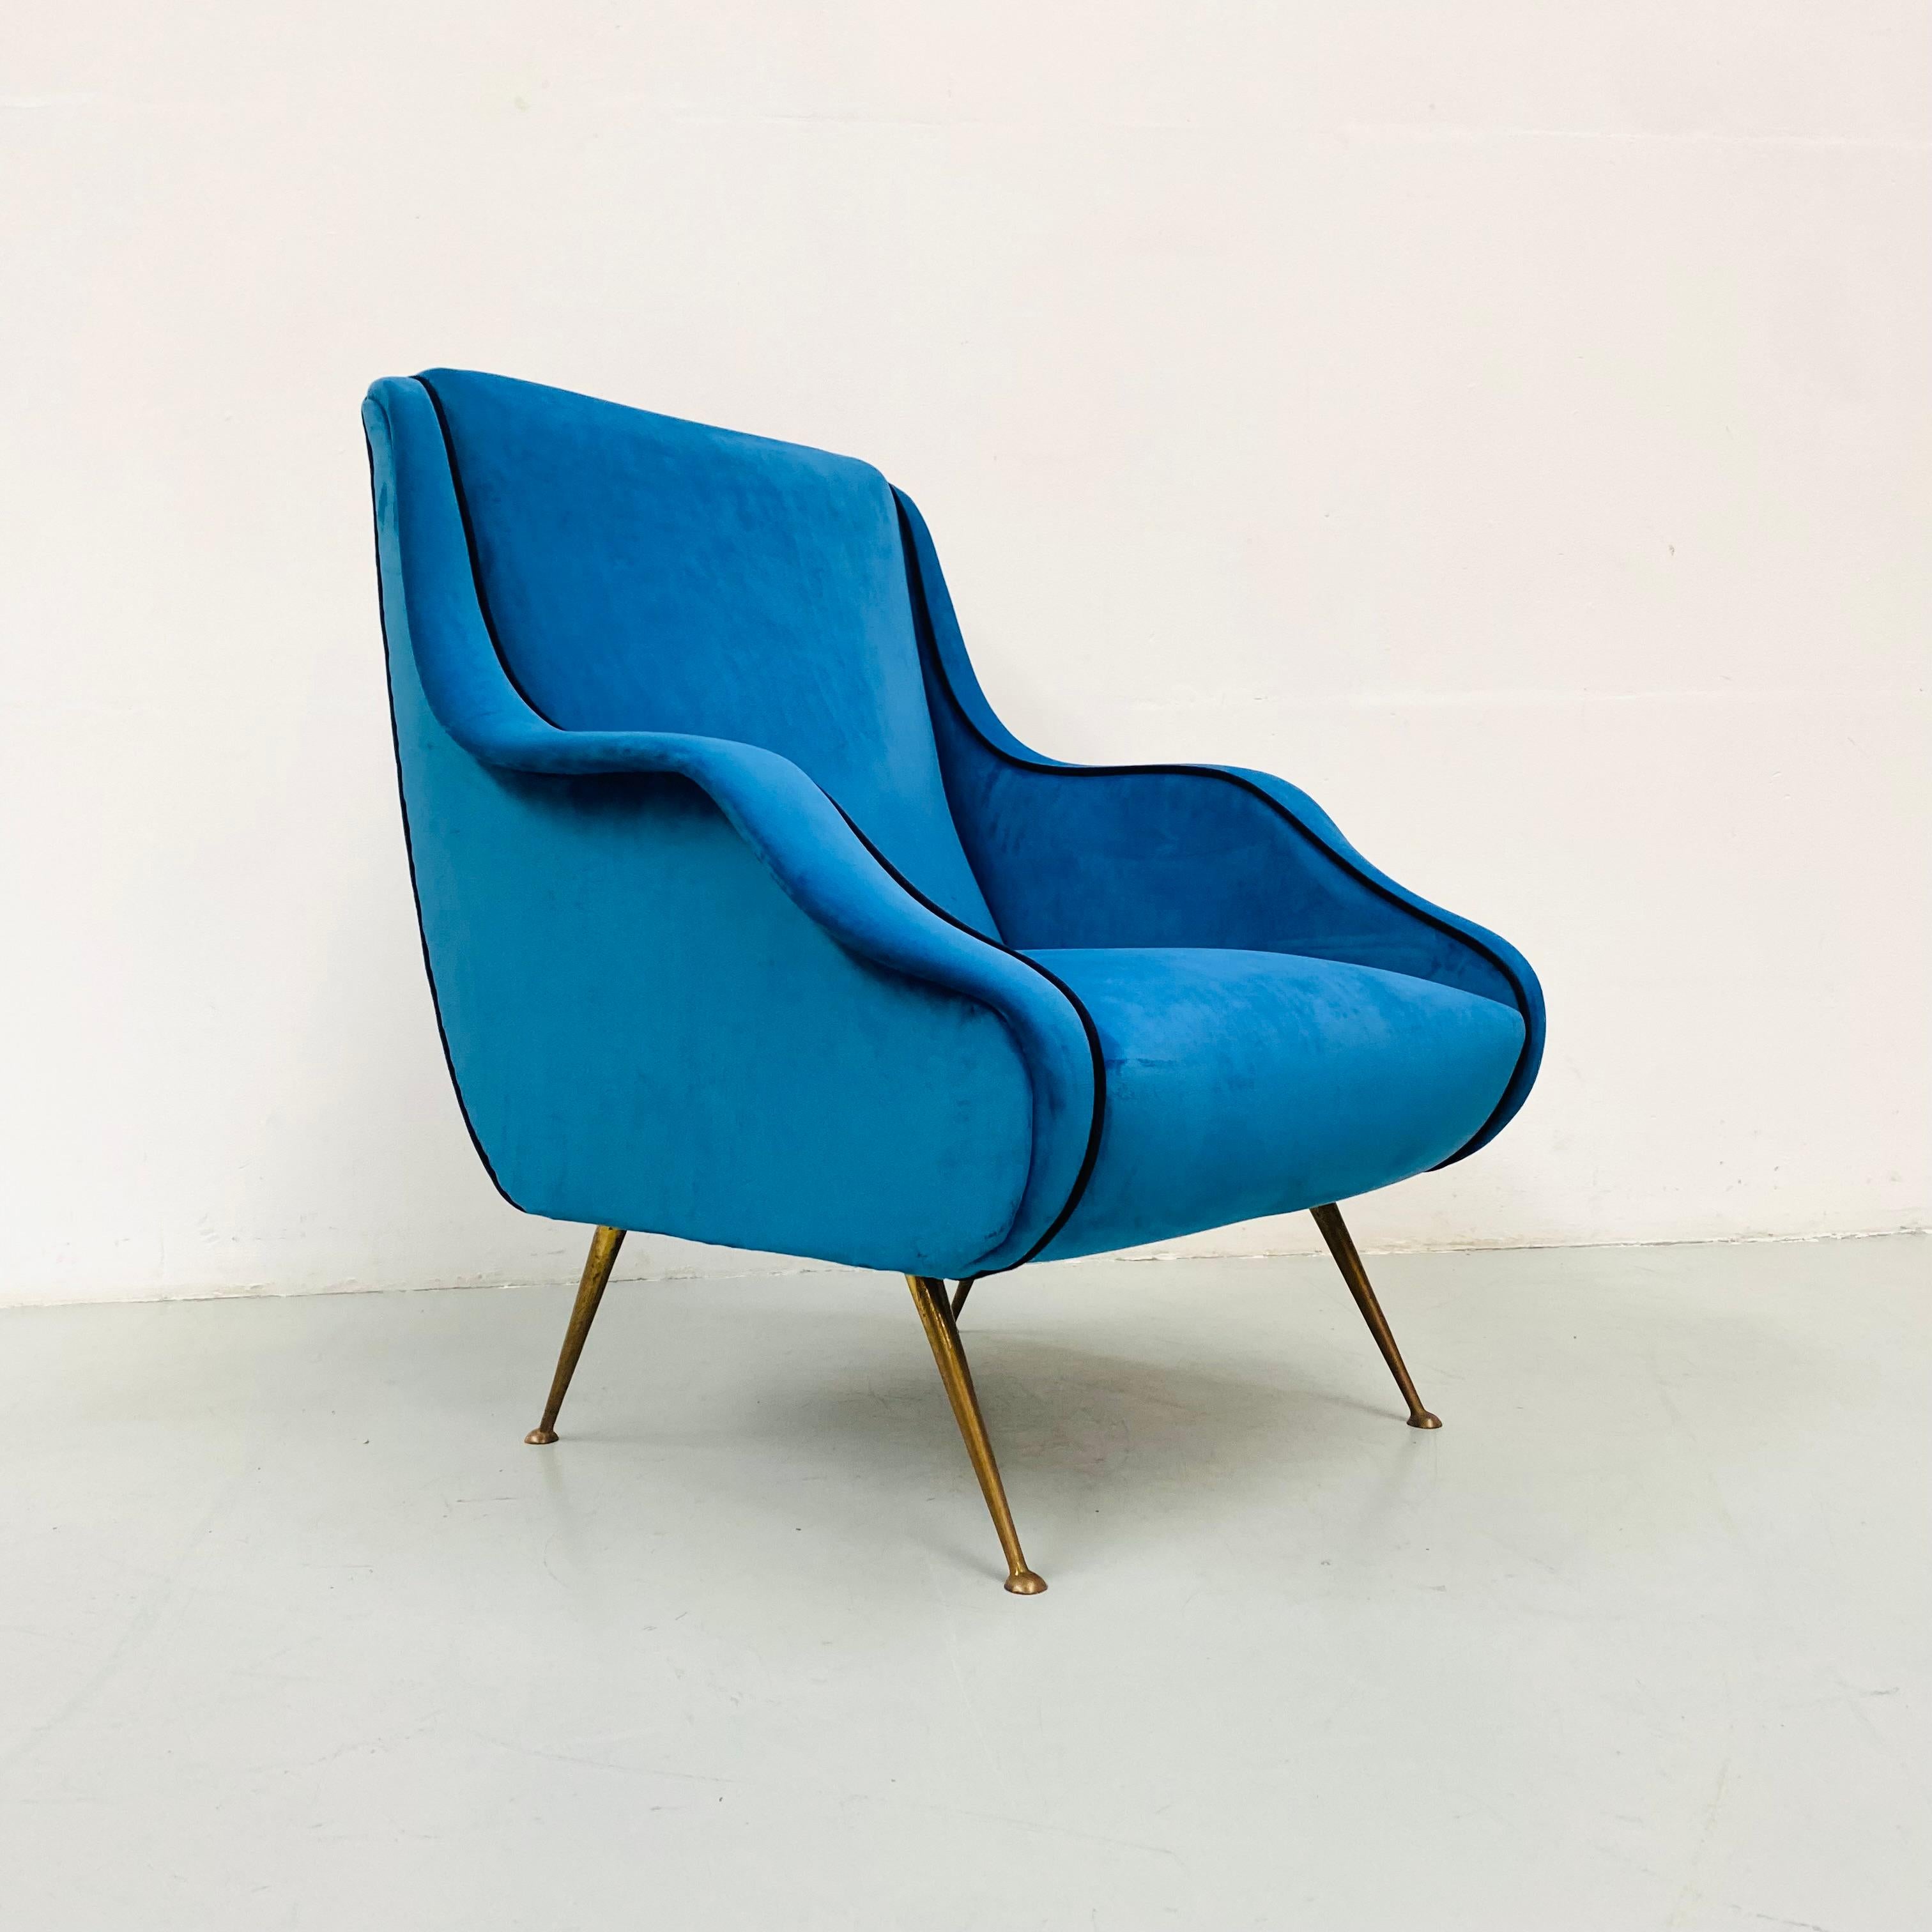 A rare sculptural reupholstered lounge chair with brass legs by Carlo de Carli, Italy 1950s. 

Follower and friend of Gio Ponti, to whom he succeeded in 1962 in the chair of Interior Architecture, Furnishing and Decoration at the Milan